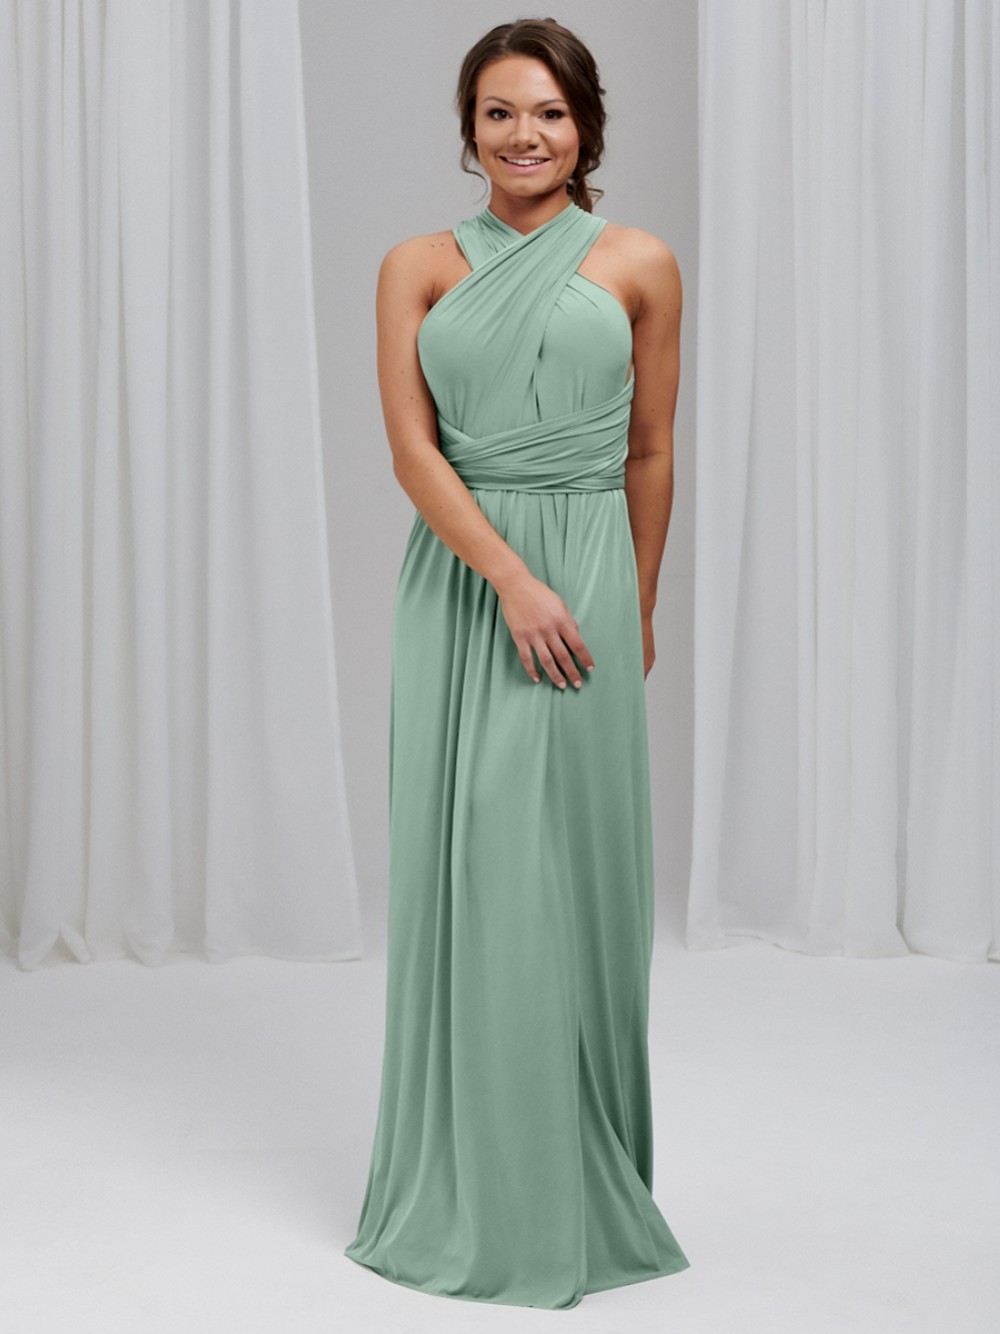 Photograph: Emily Rose Mint Green Multiway Bridesmaid Dress (One Size)